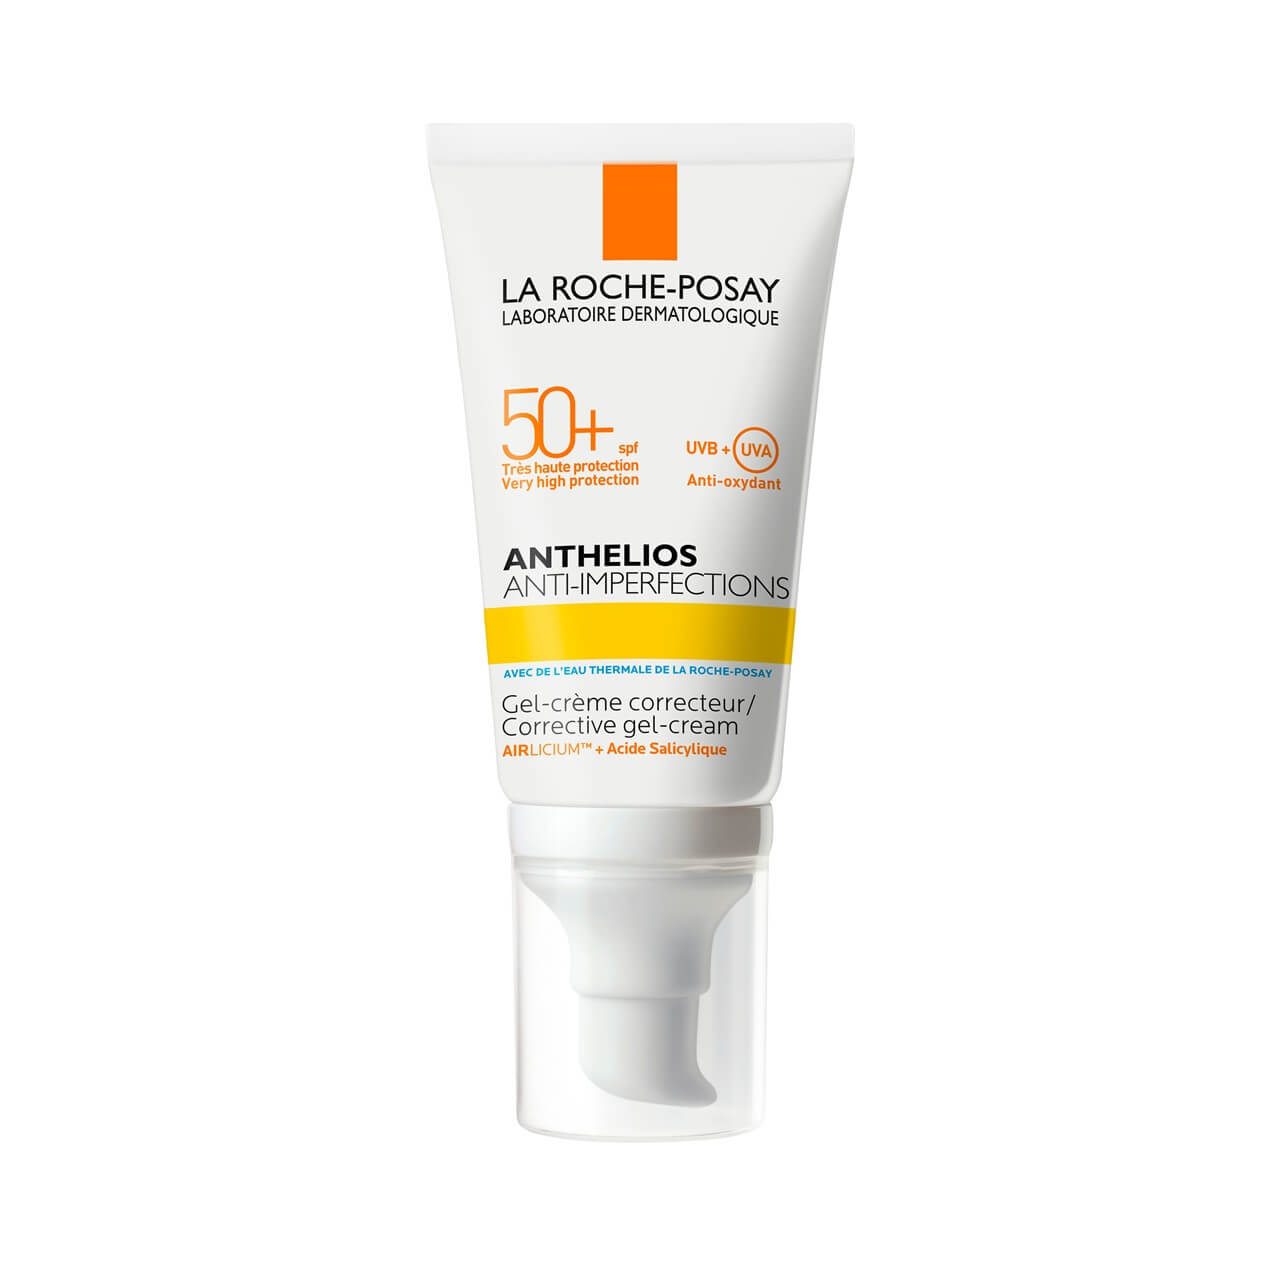 La Roche-Posay Anthelios Anti-Imperfections